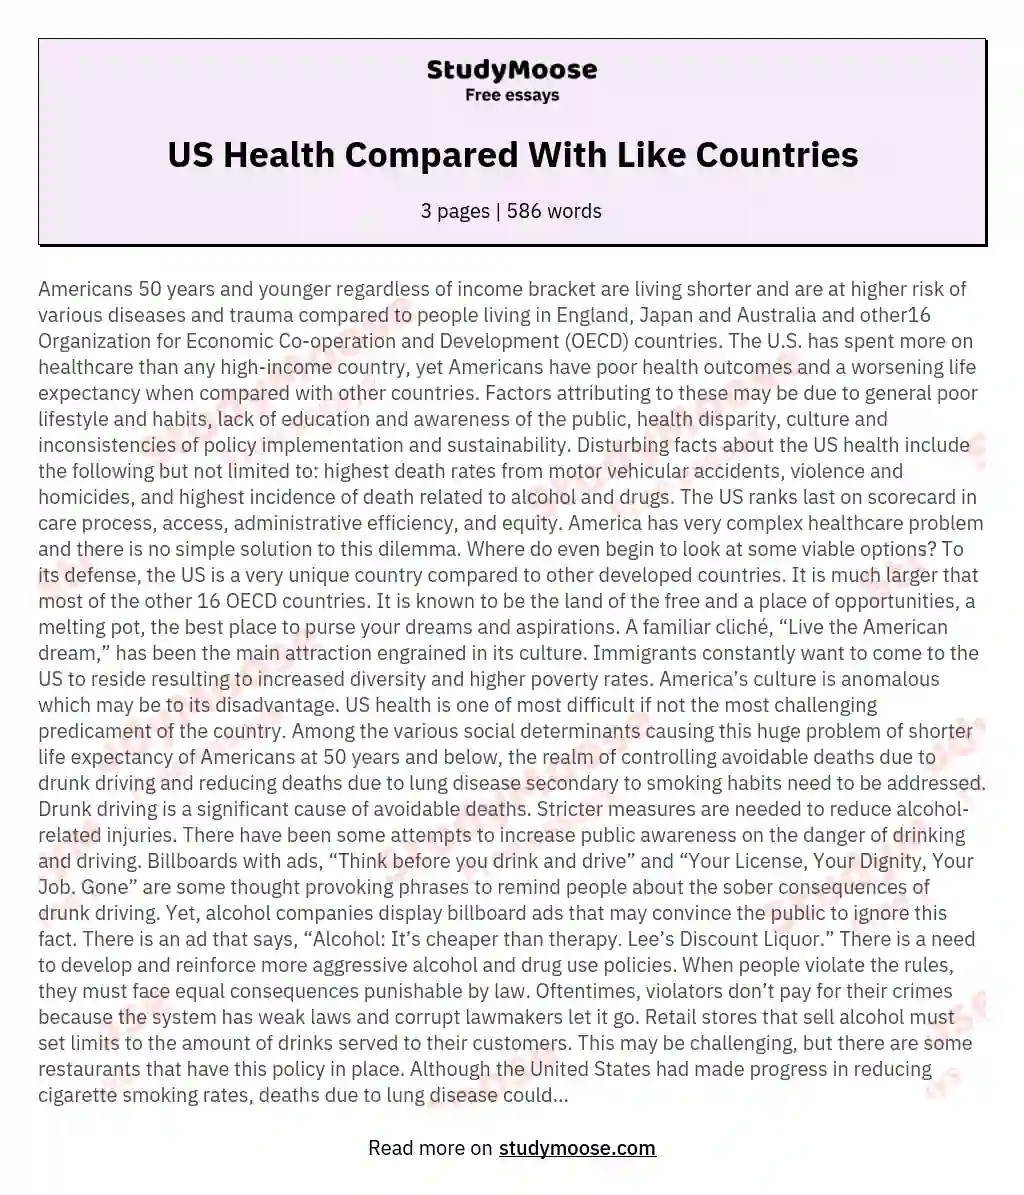 US Health Compared With Like Countries essay